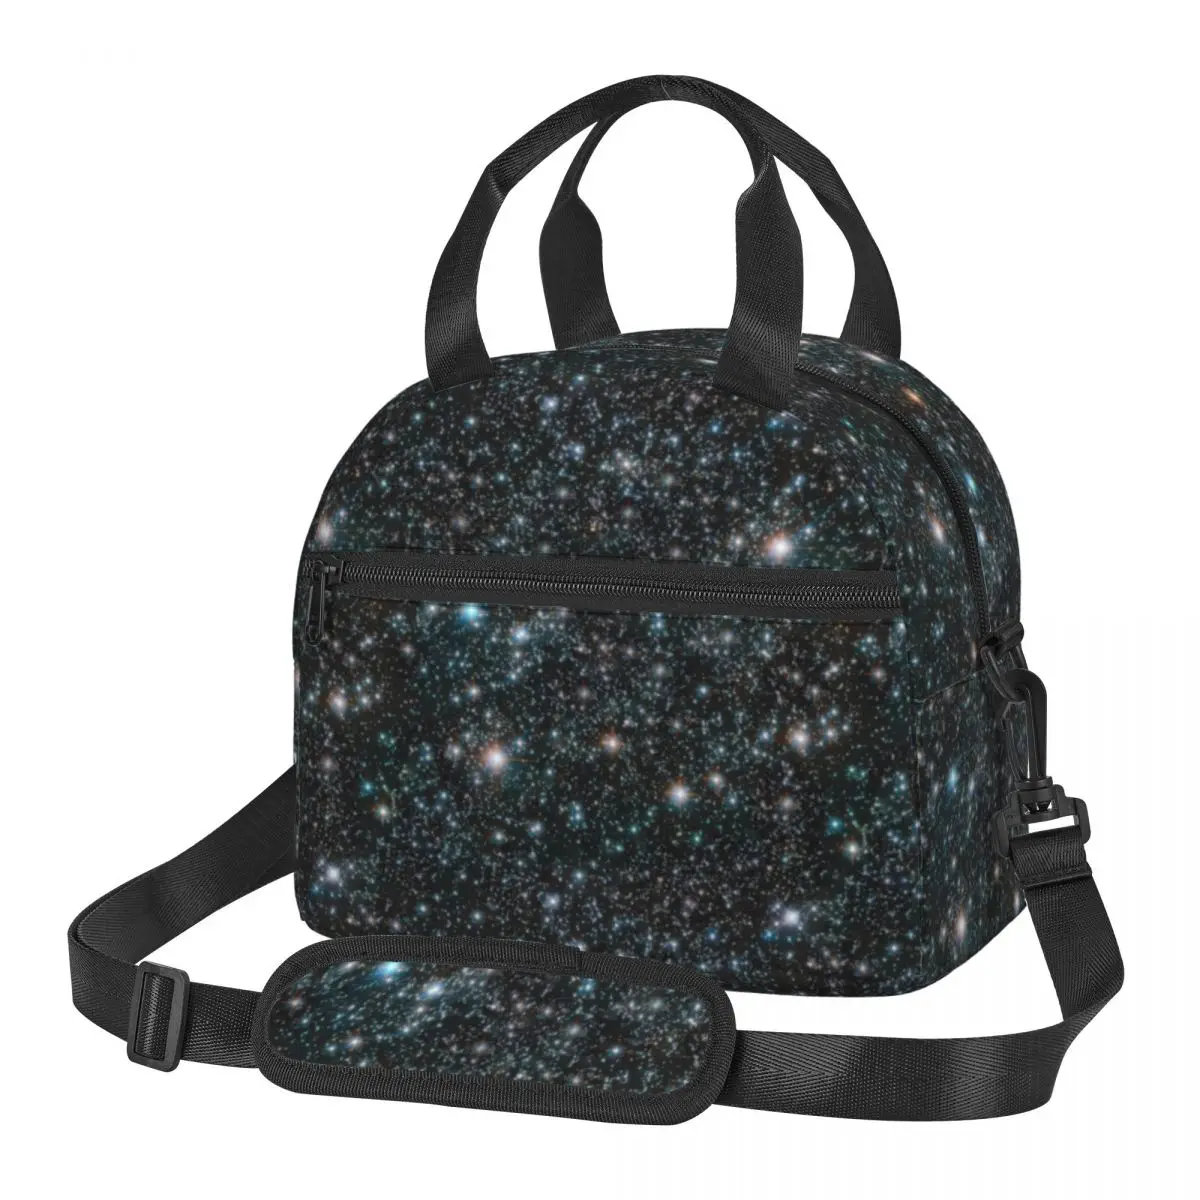 

Galaxy Stars Lunch Bag with Handle Stars Cosmic Outer Space Universe Black Meal Cooler Bag Beautiful Cooling Travel Thermal Bag